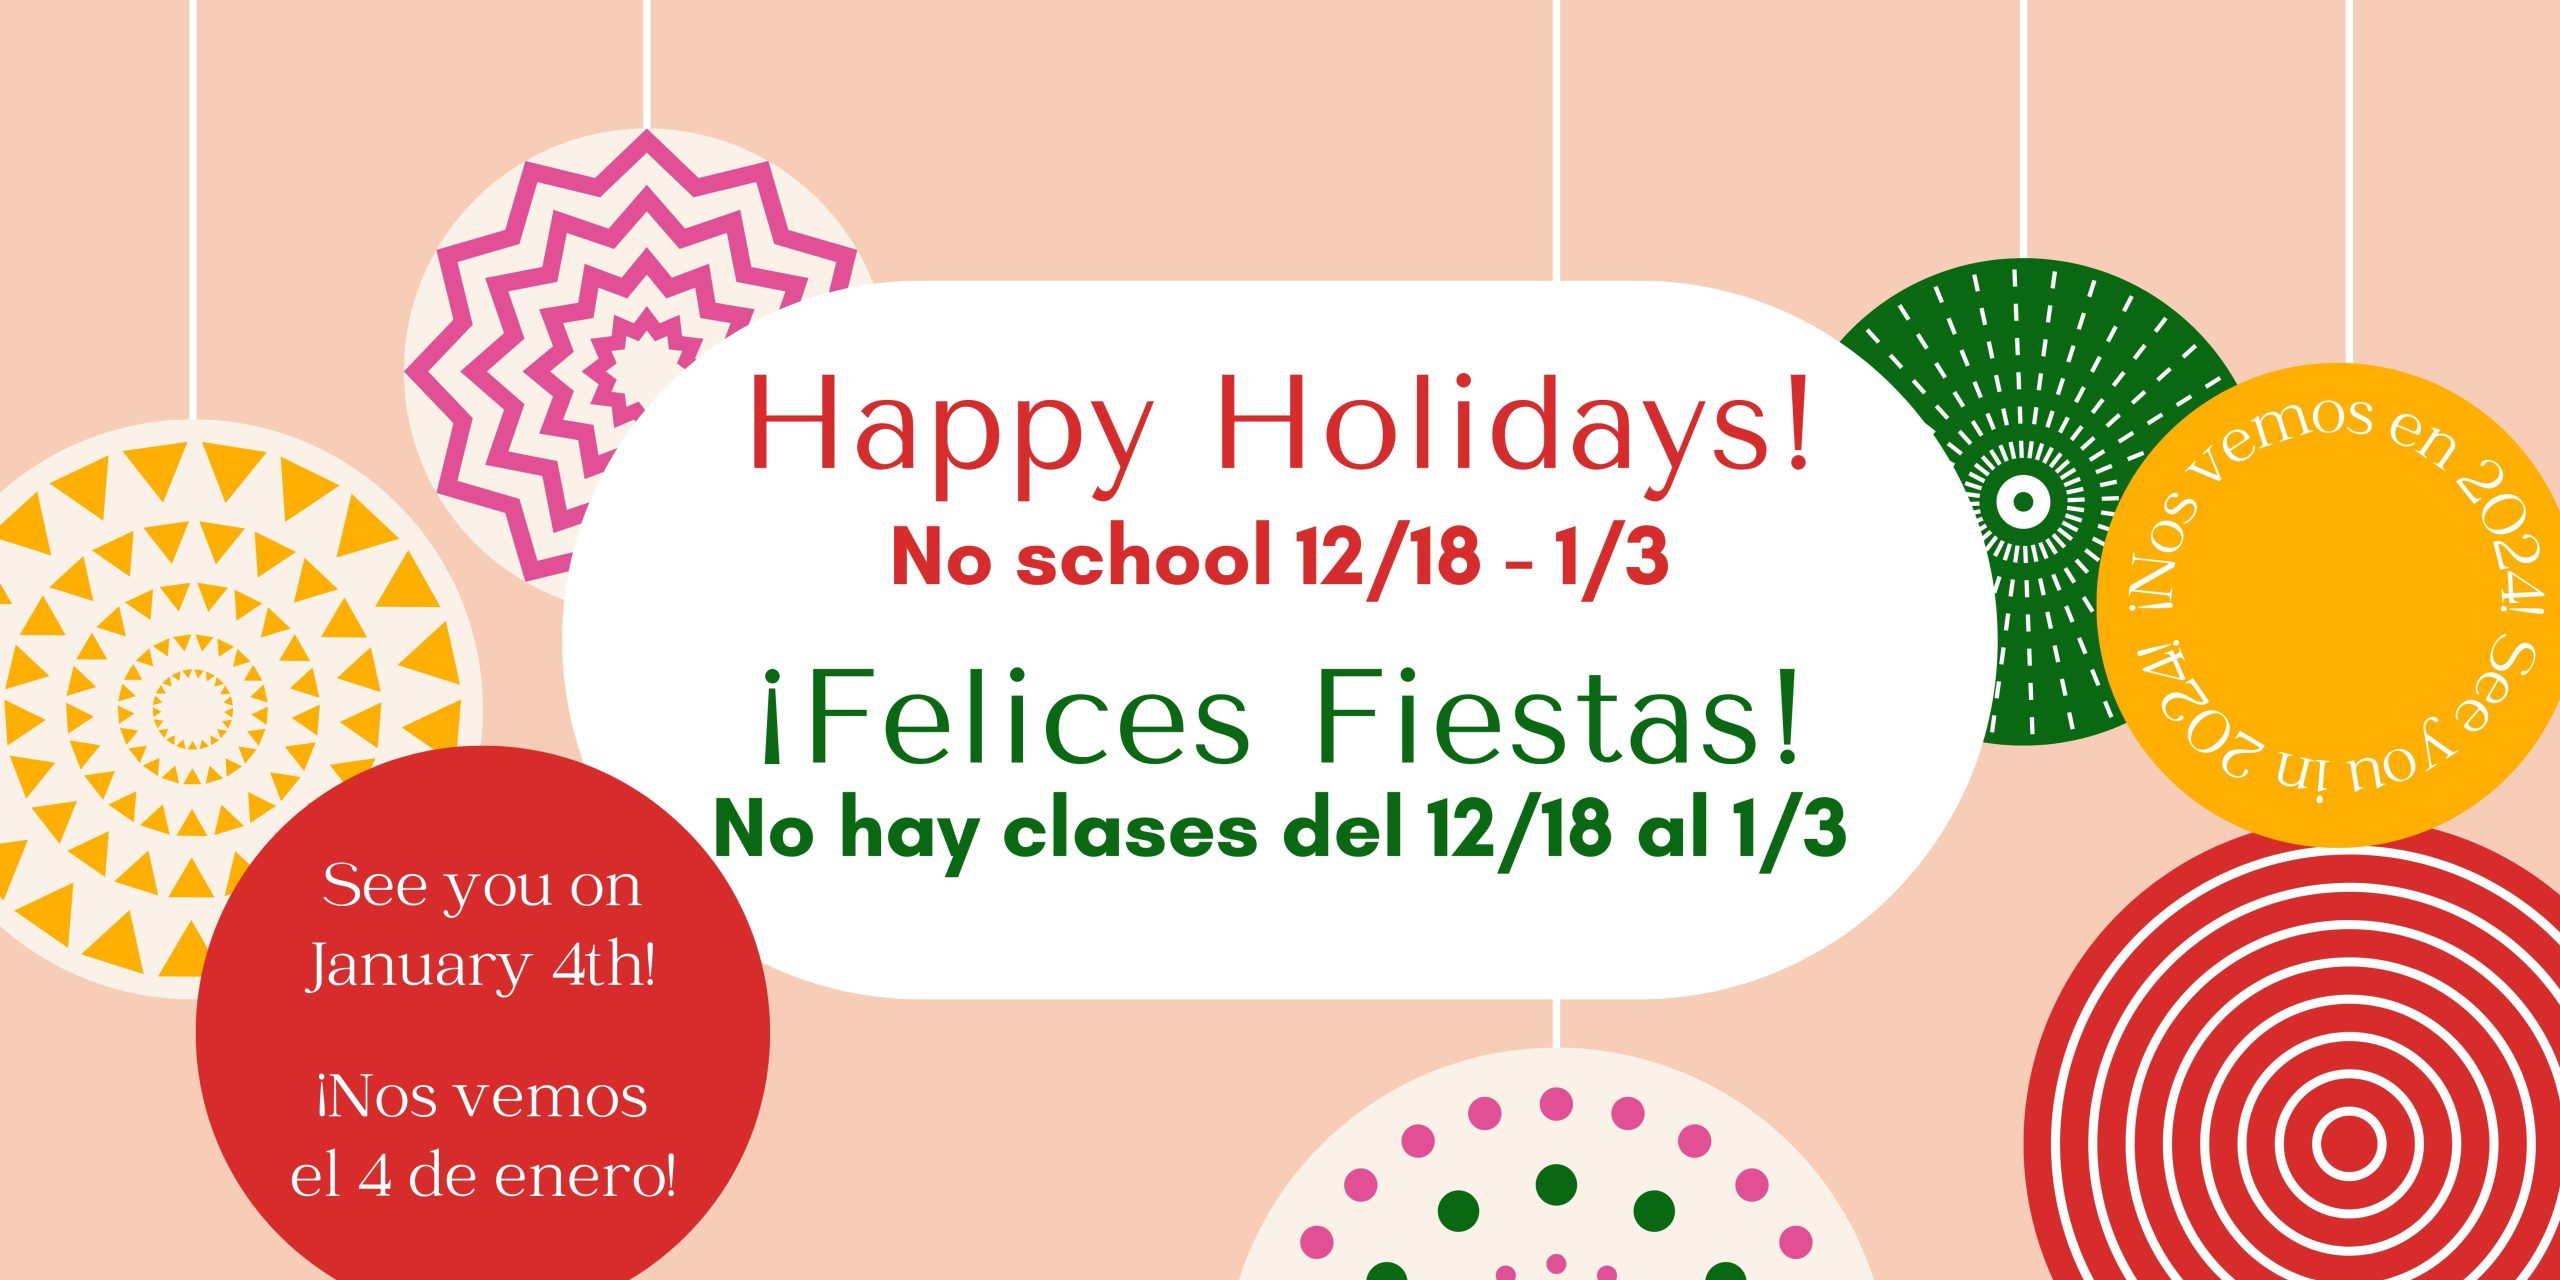 Light pink background with red and green ornaments hanging. Red text says, "Happy Holidays! No school 12/18-1/3." Text says in green, "¡Felices Fiestas! No hay clases del 12/18 al 1/3."